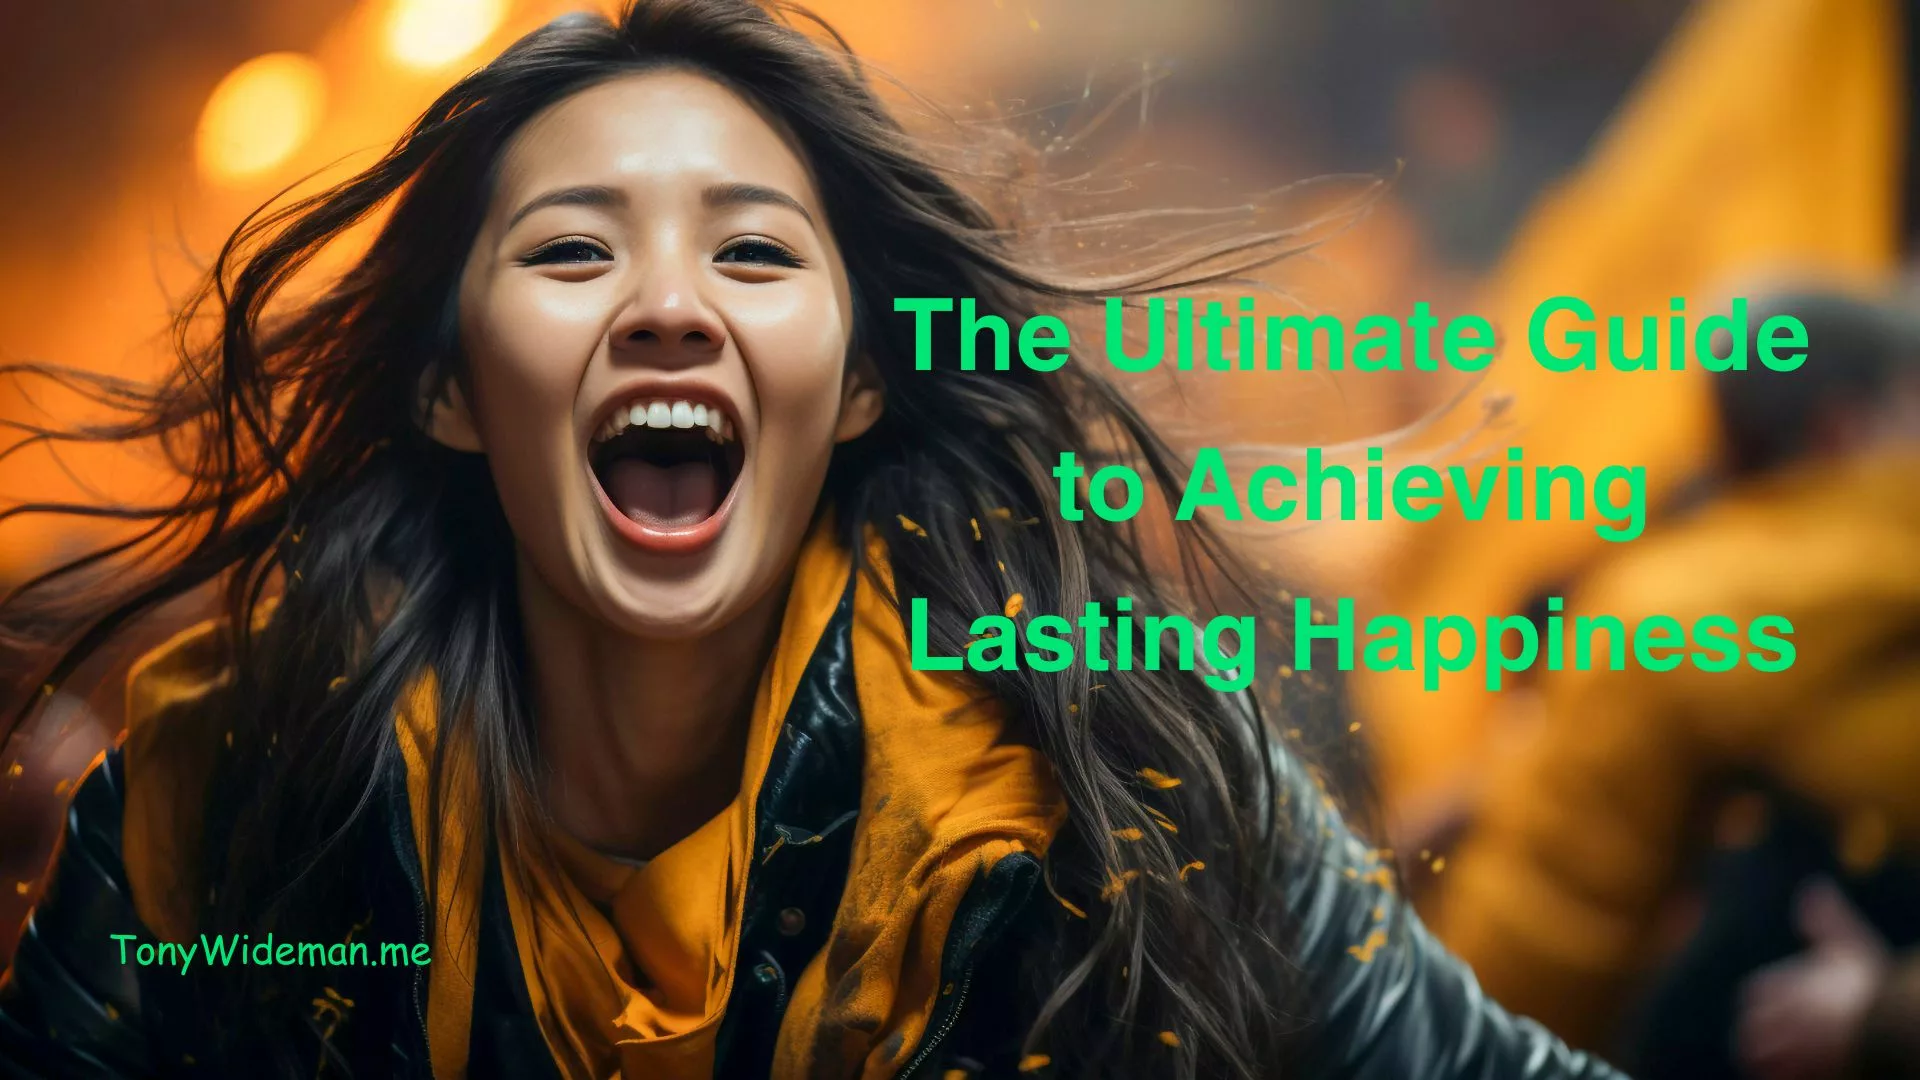 The Ultimate Guide to Achieving Lasting Happiness